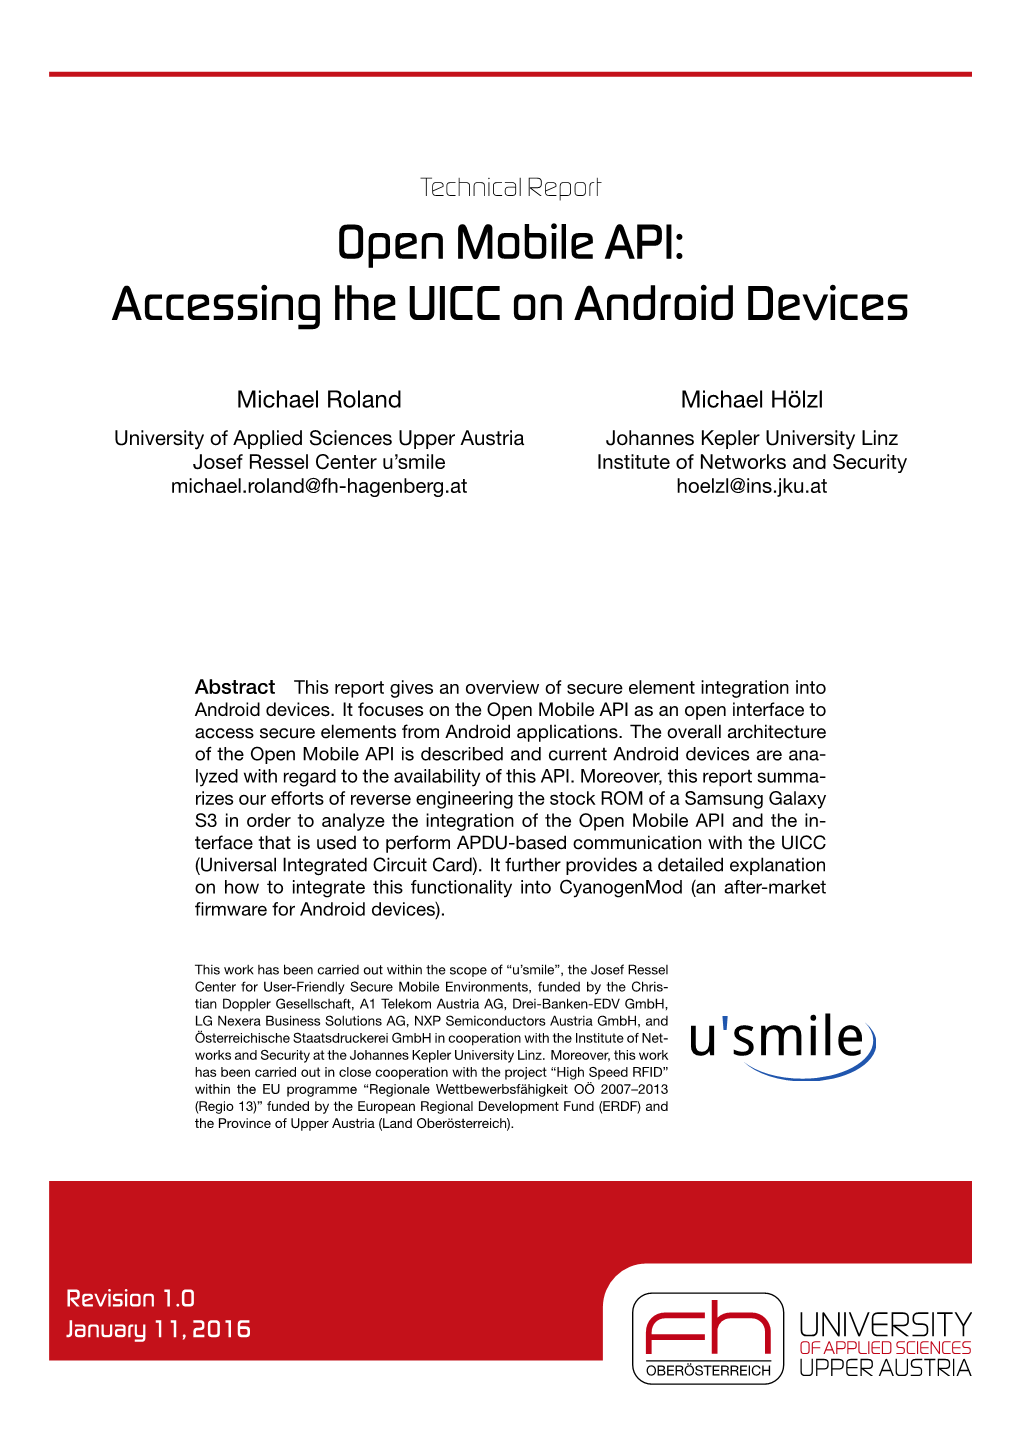 Open Mobile API: Accessing the UICC on Android Devices